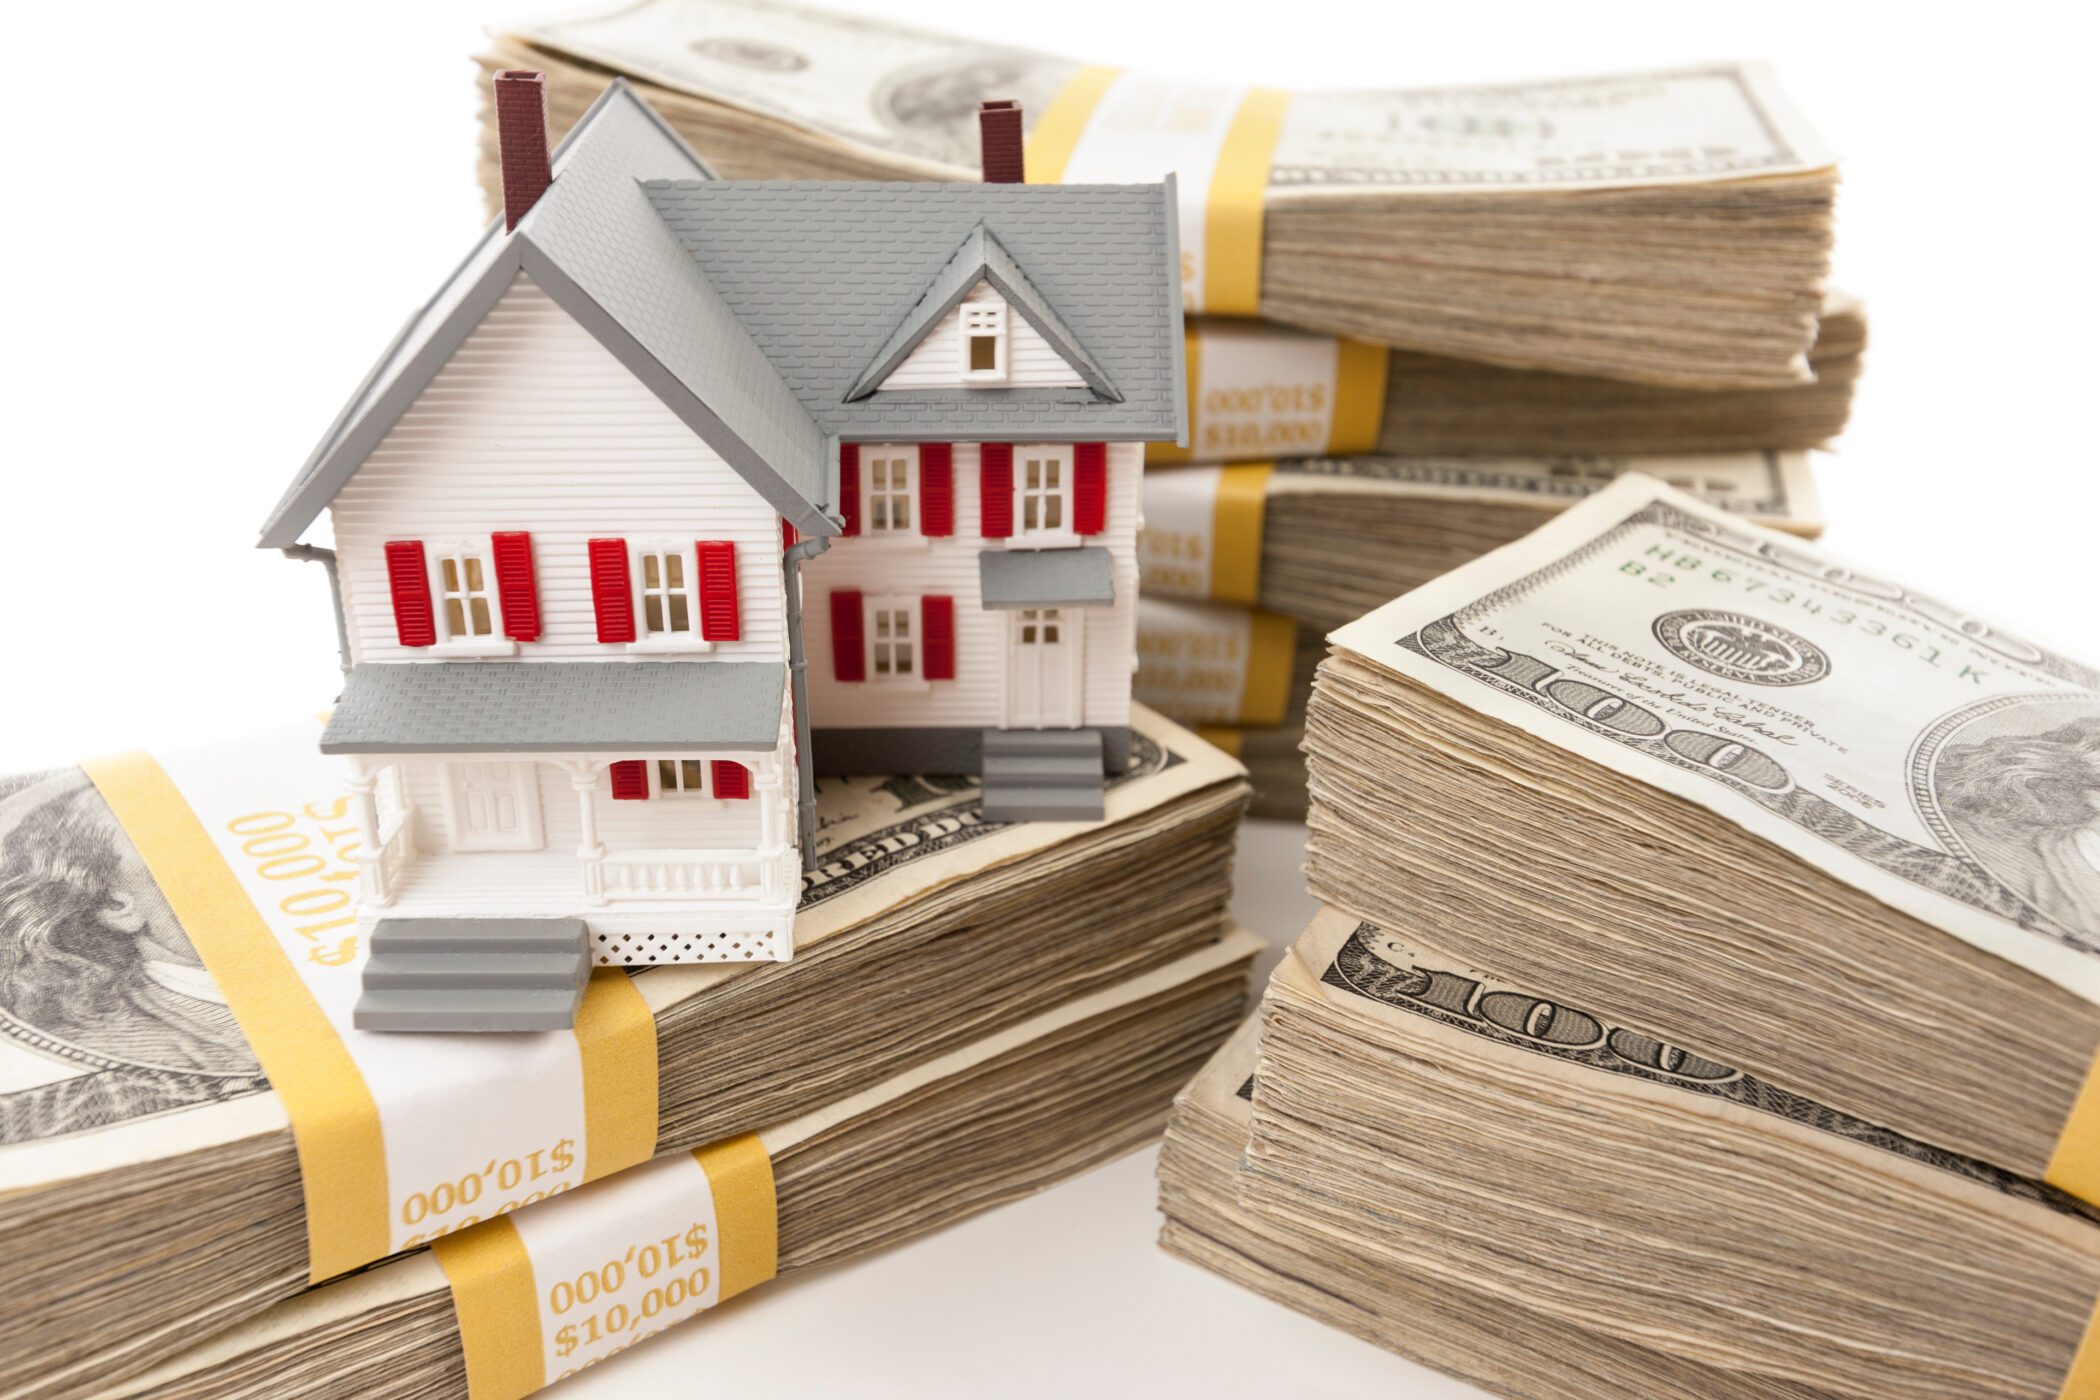 What Can You Use Home Equity Loans For